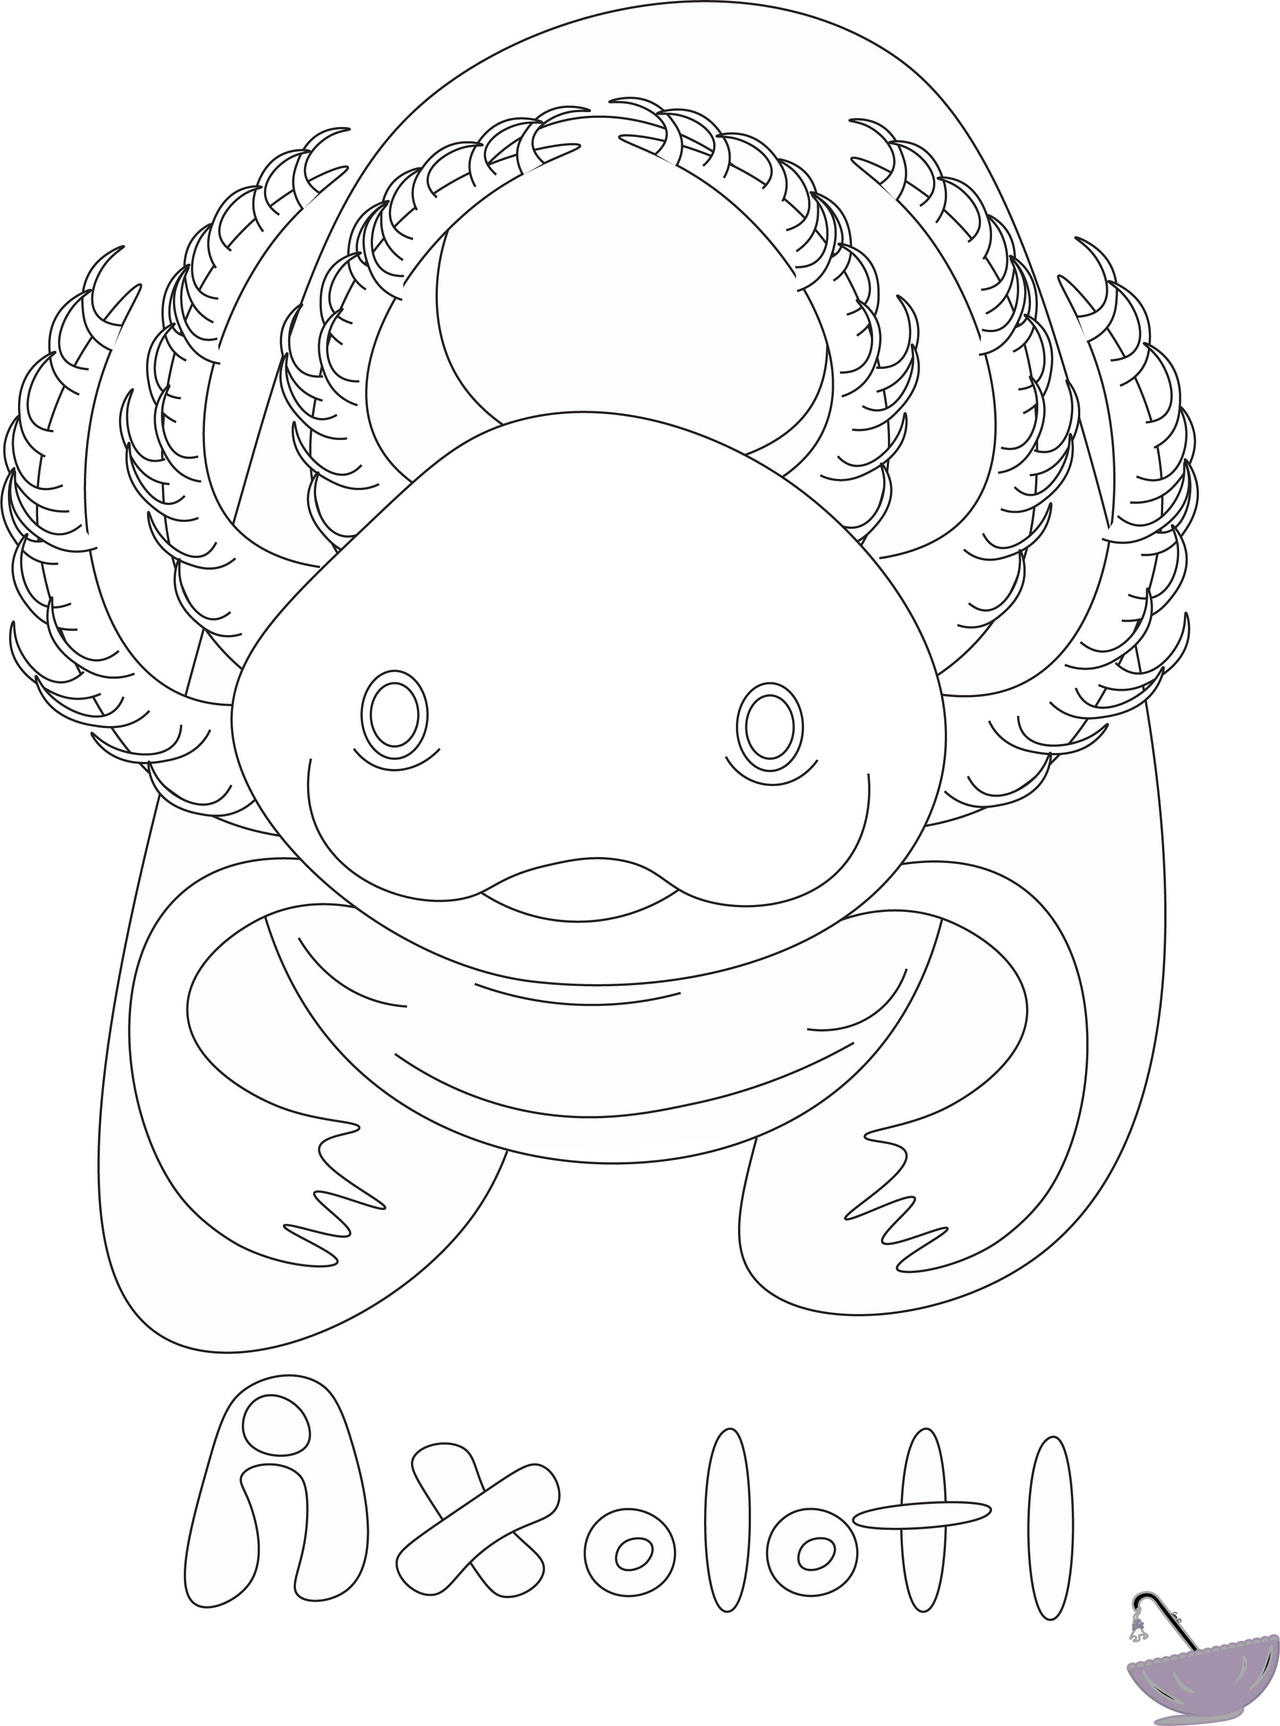 A Axolotl Coloring Page By Merlinmetal On Deviantart